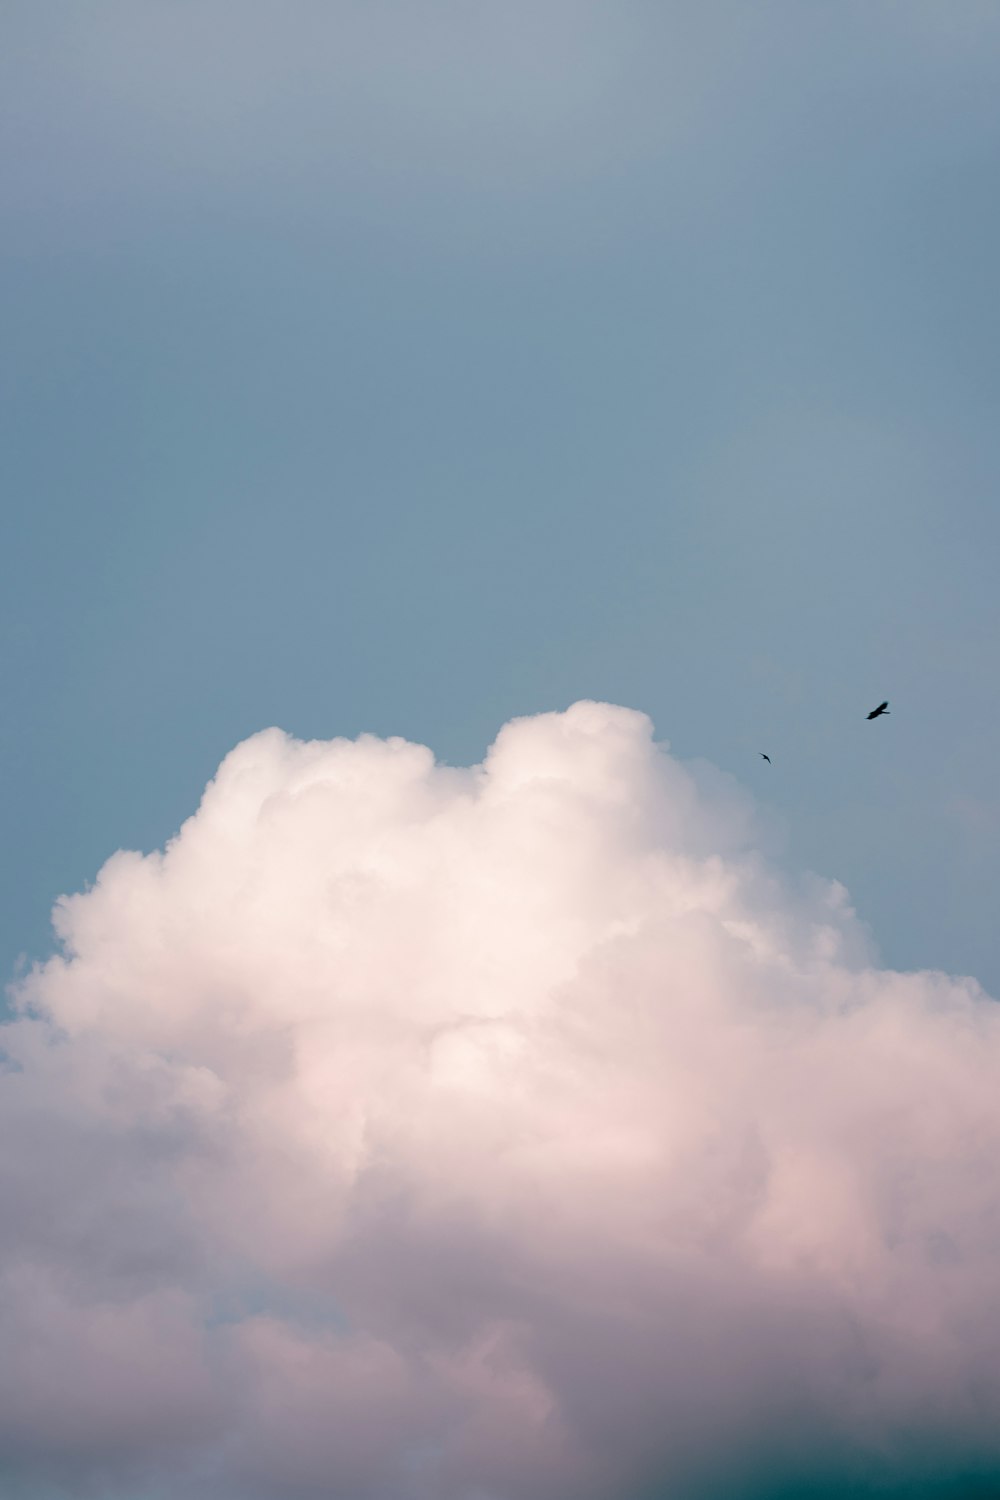 two birds flying in the sky on a cloudy day